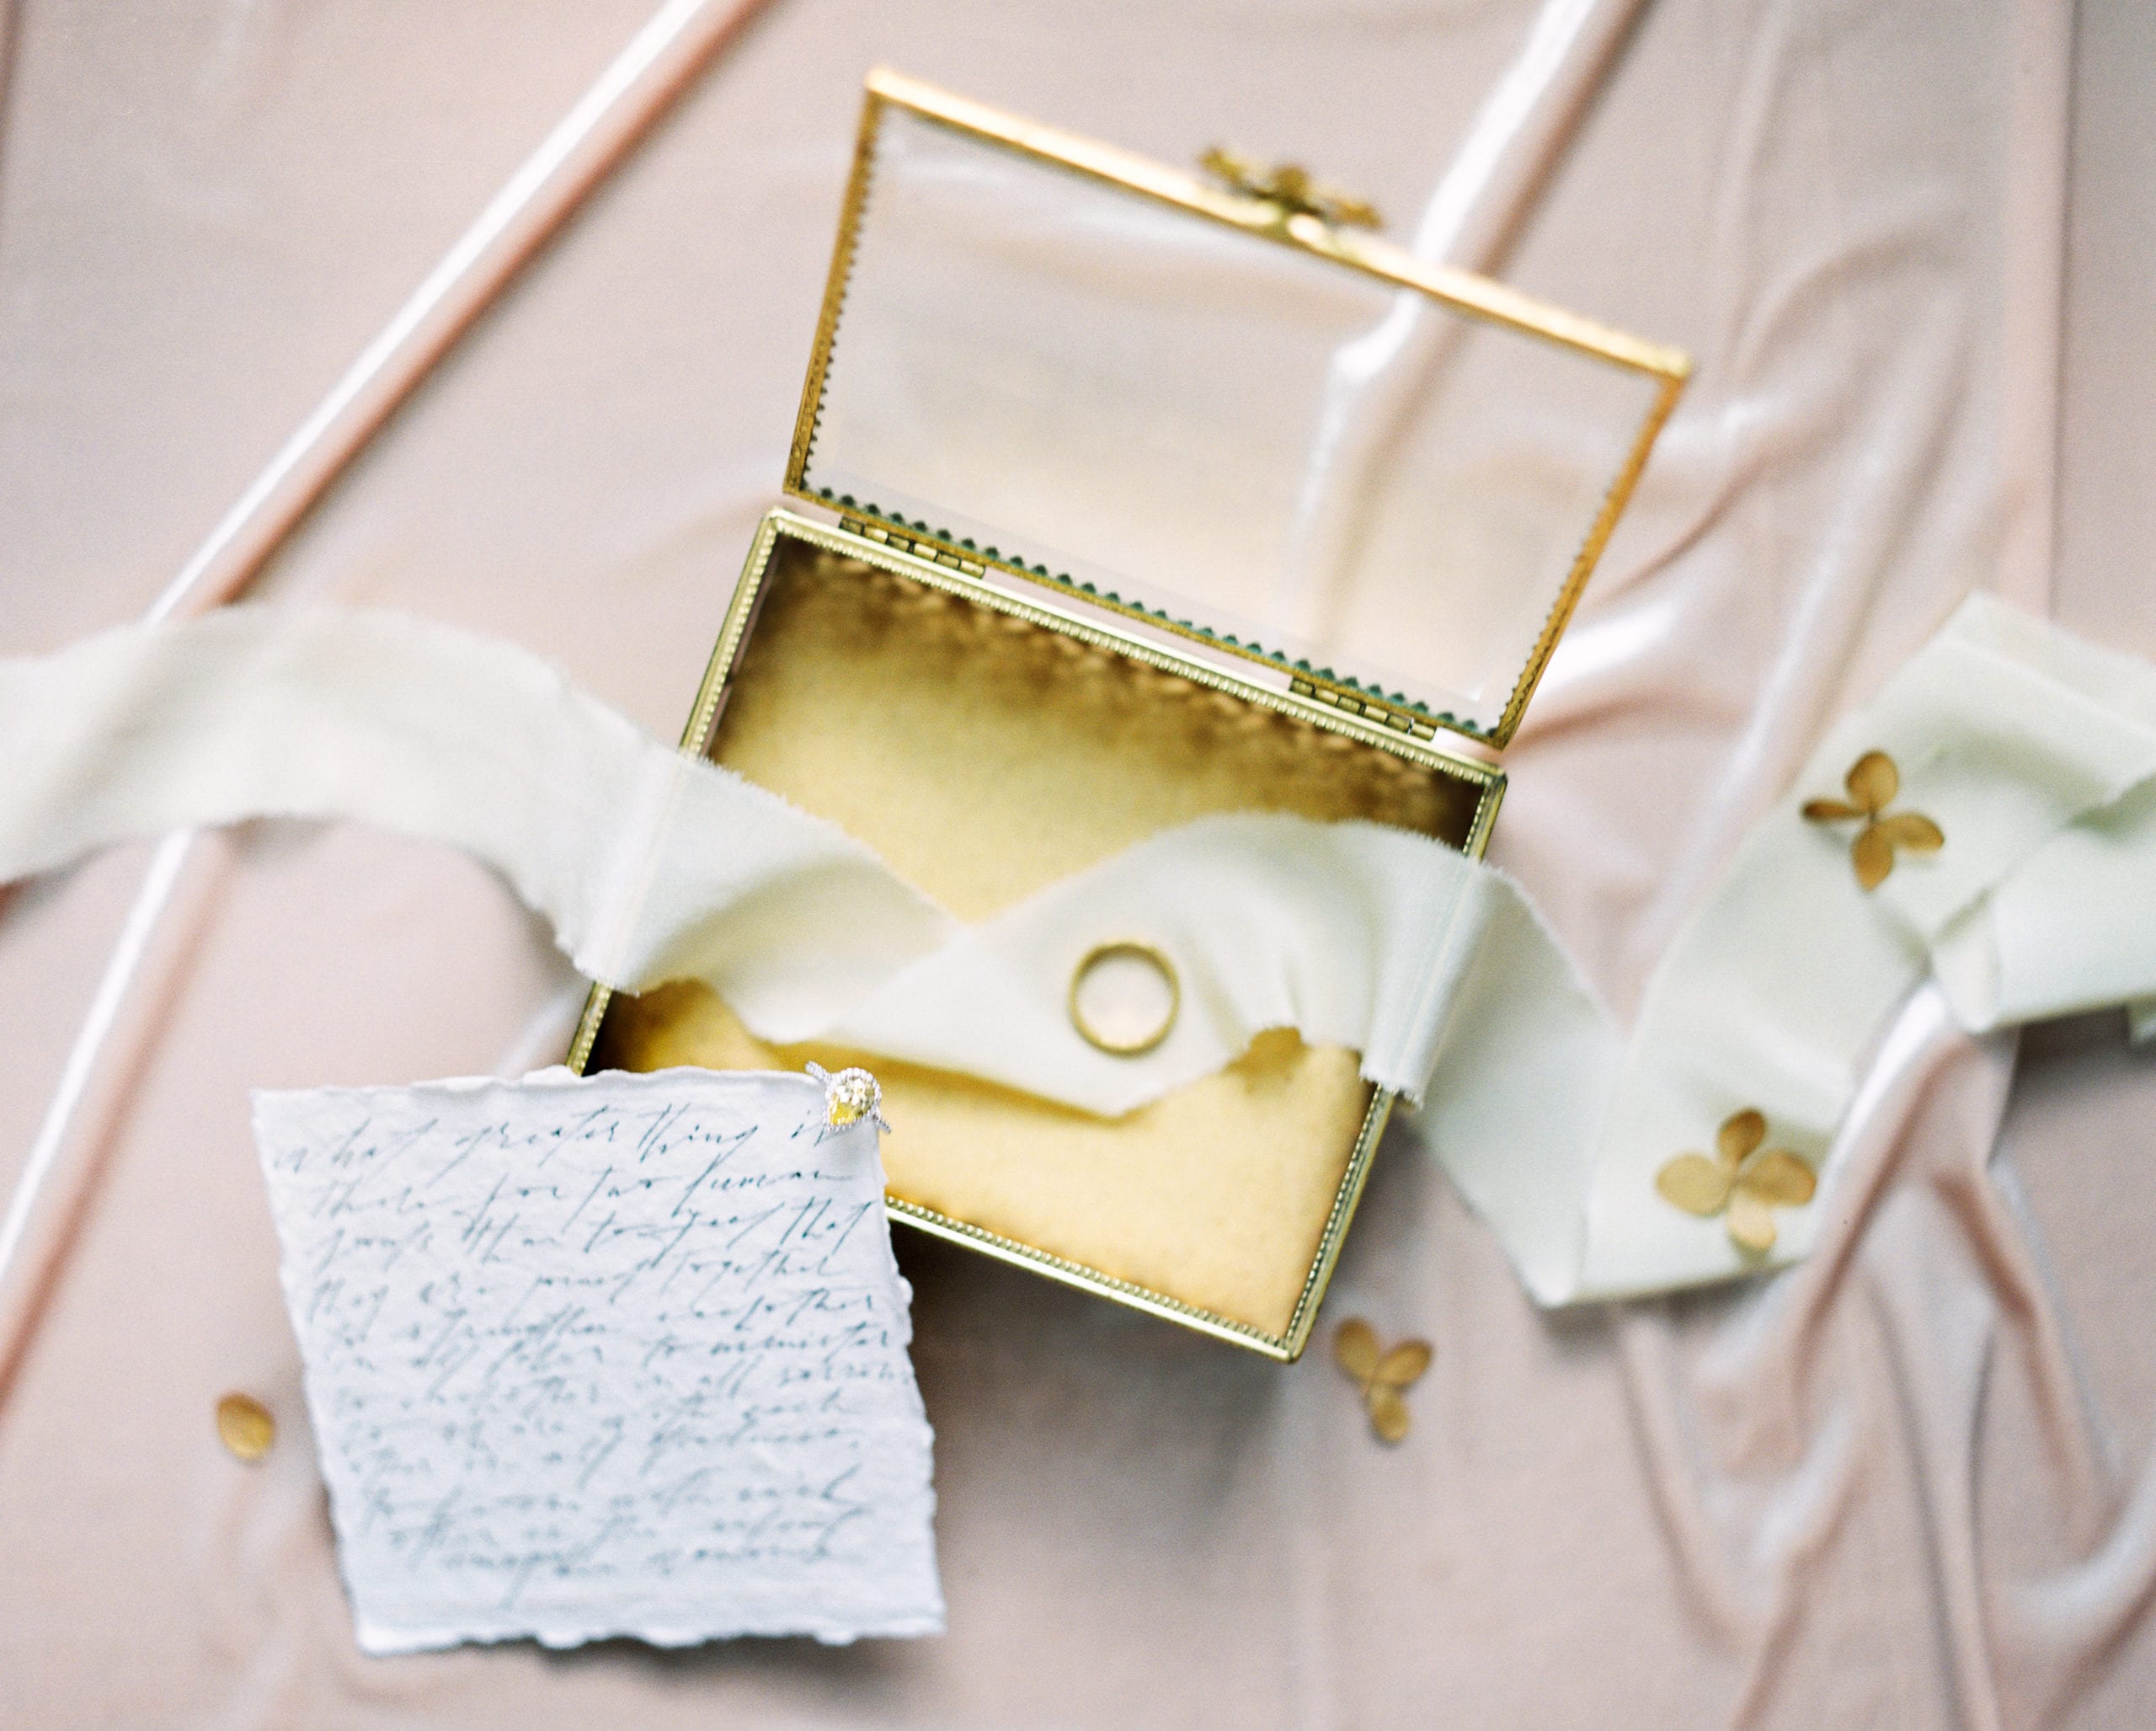 Bridal wedding details by Fox and west and silk and willow ribbons